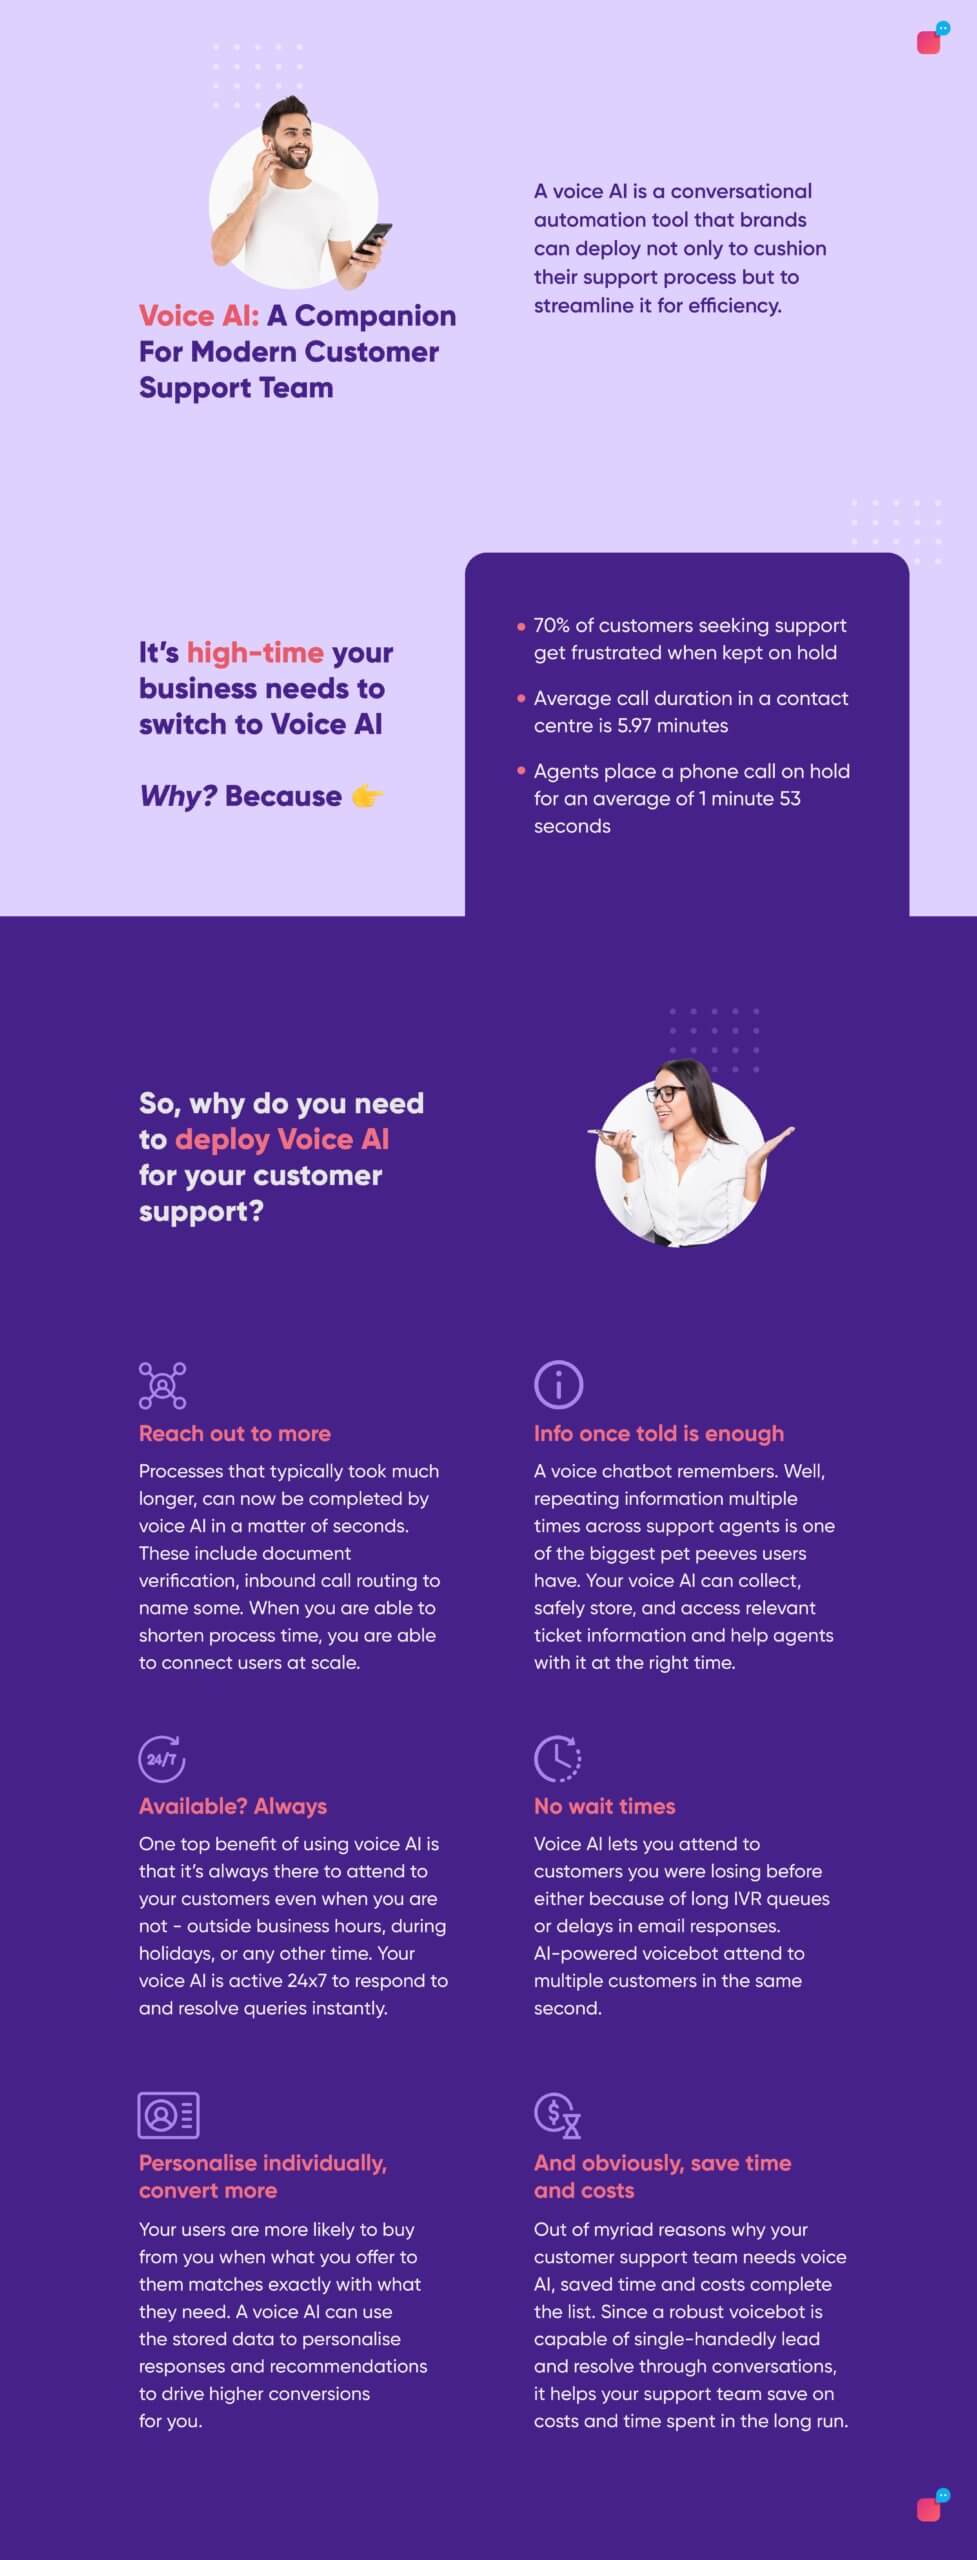 List of why you should deploy Voice-powered customer support